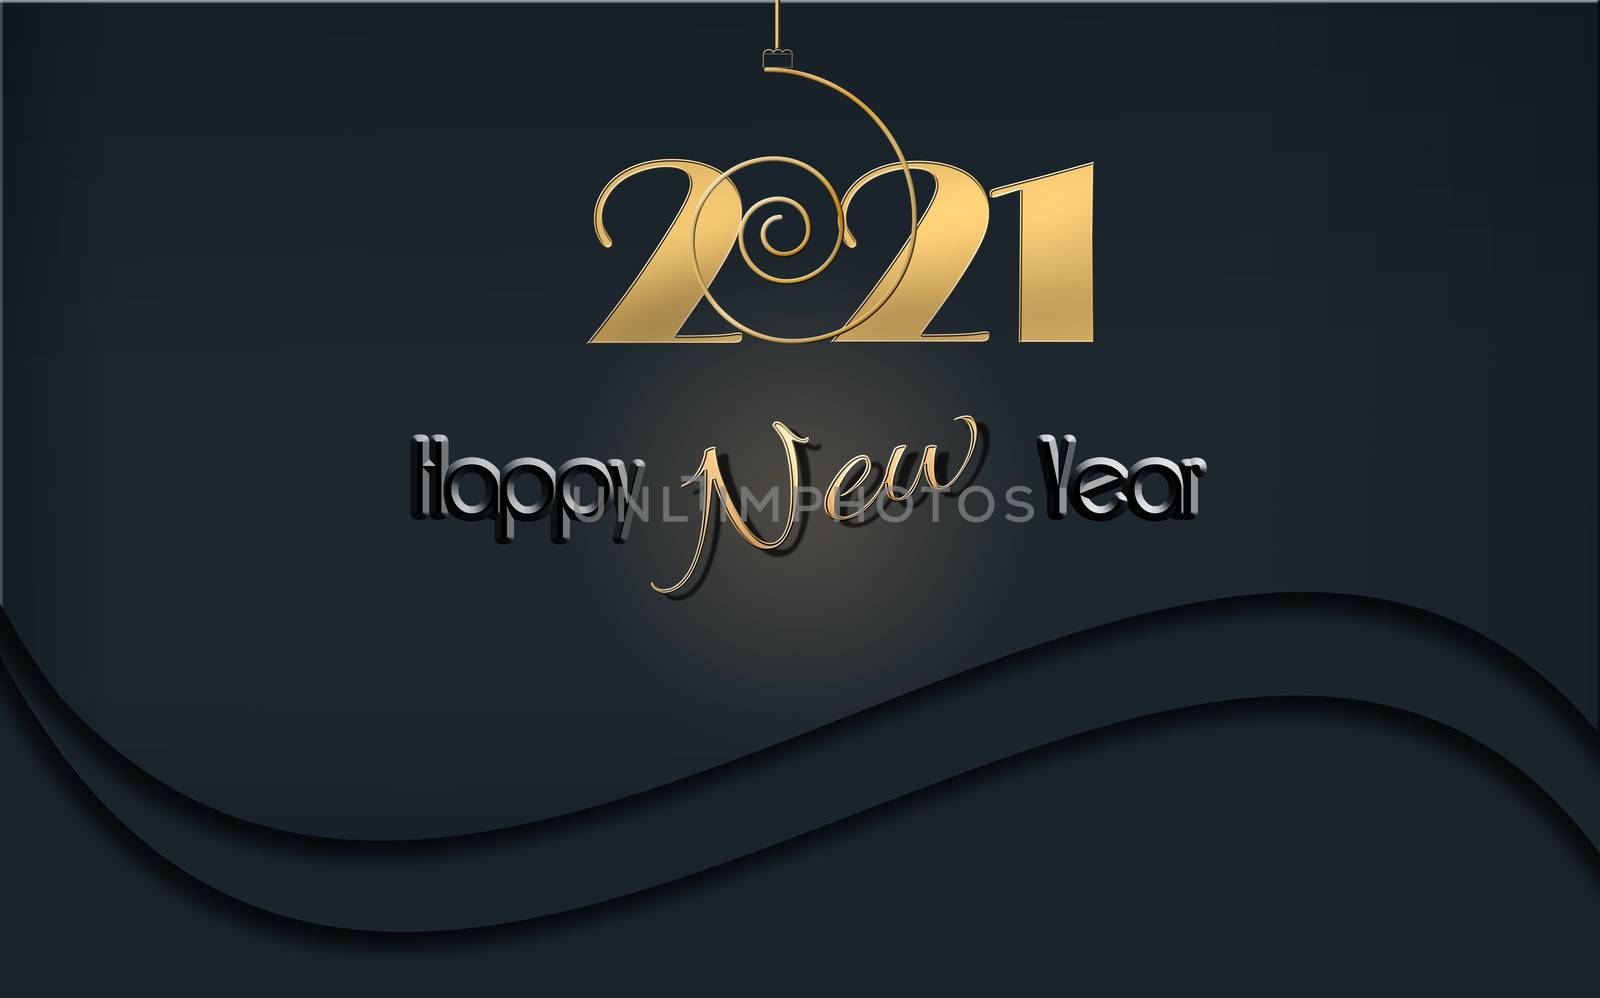 Luxury Happy New 2021 Year design with hanging gold 2021 digit on black background. Winter holidays graphic, web design, business card, calendar cover. Copy space. 3D illustration